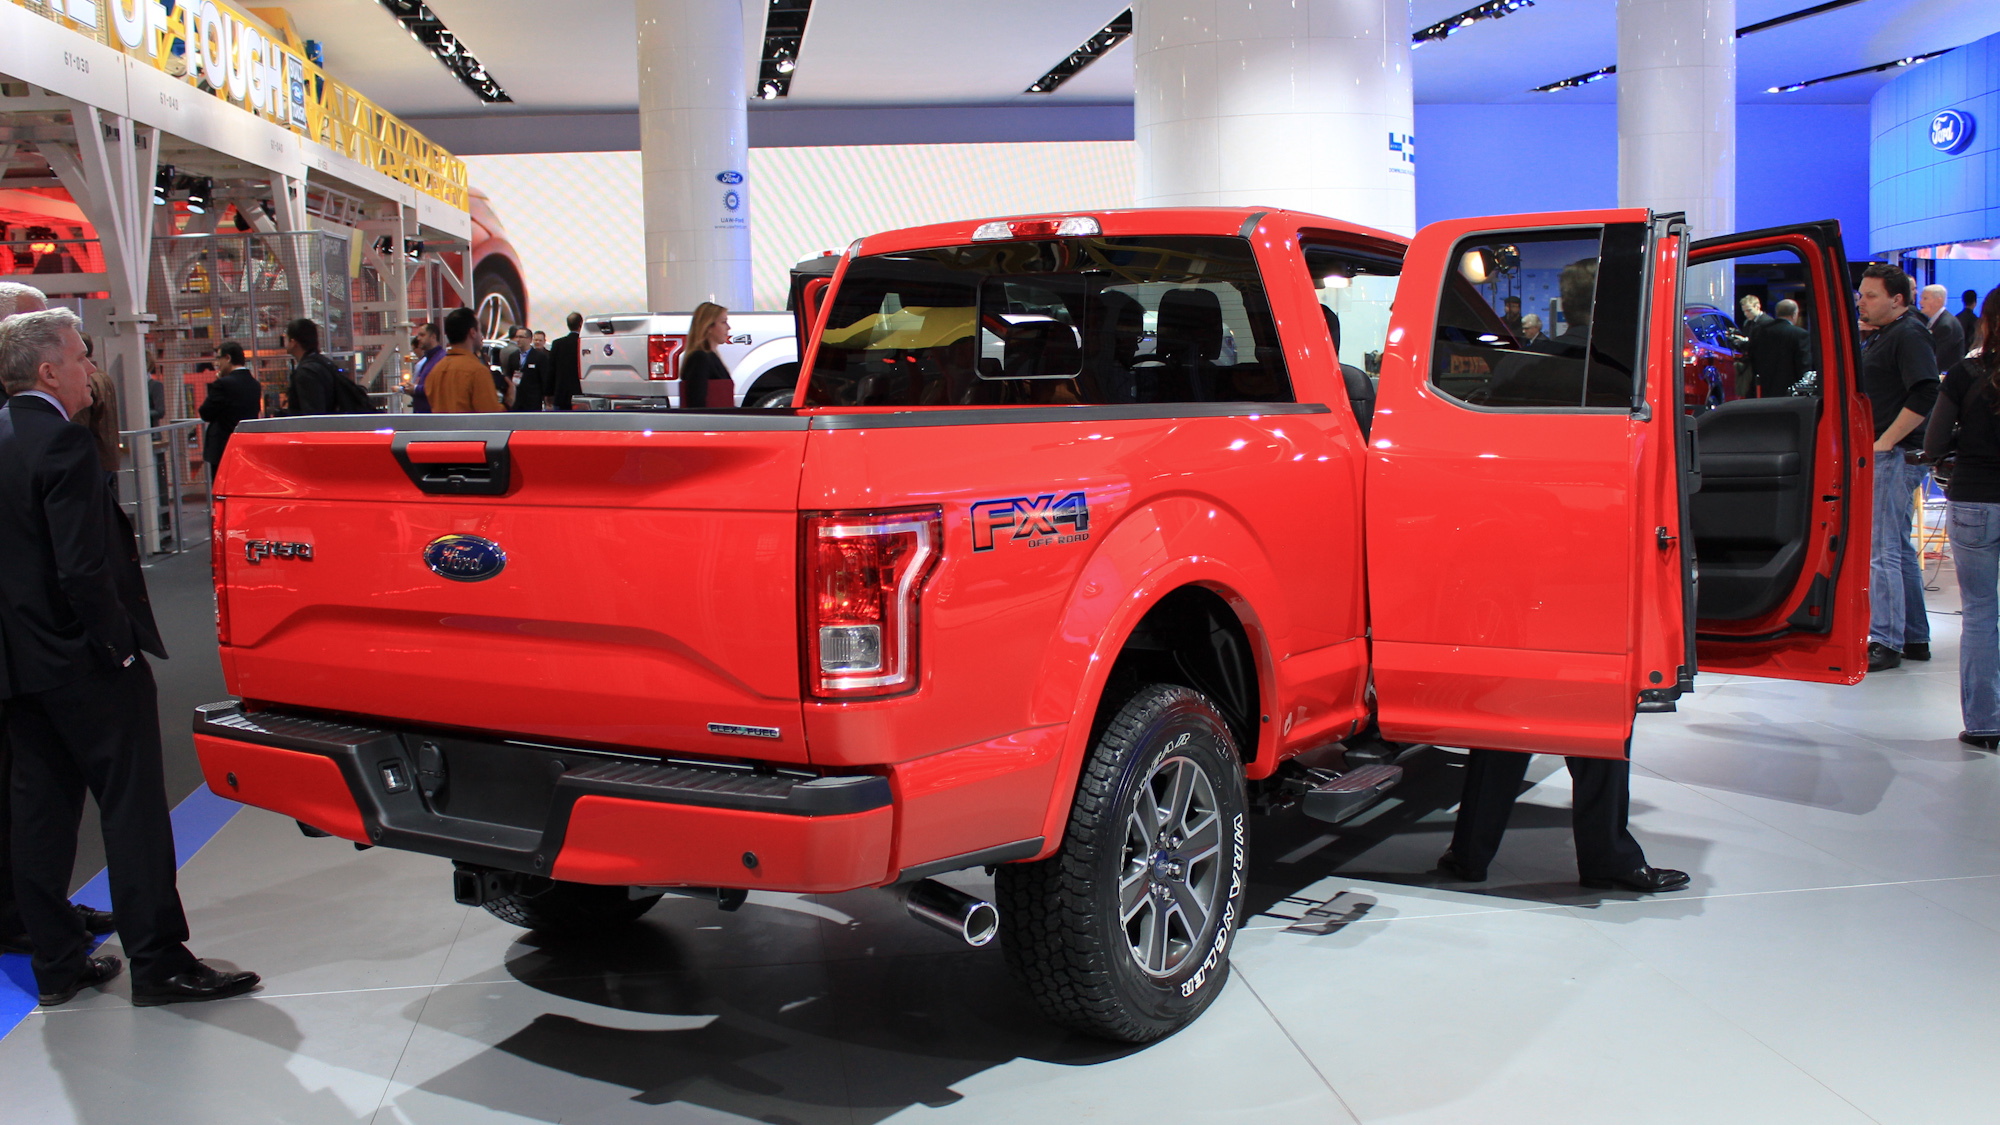 2015 Ford F-150 SFE: Highest Gas Mileage Model For Aluminum Pickup